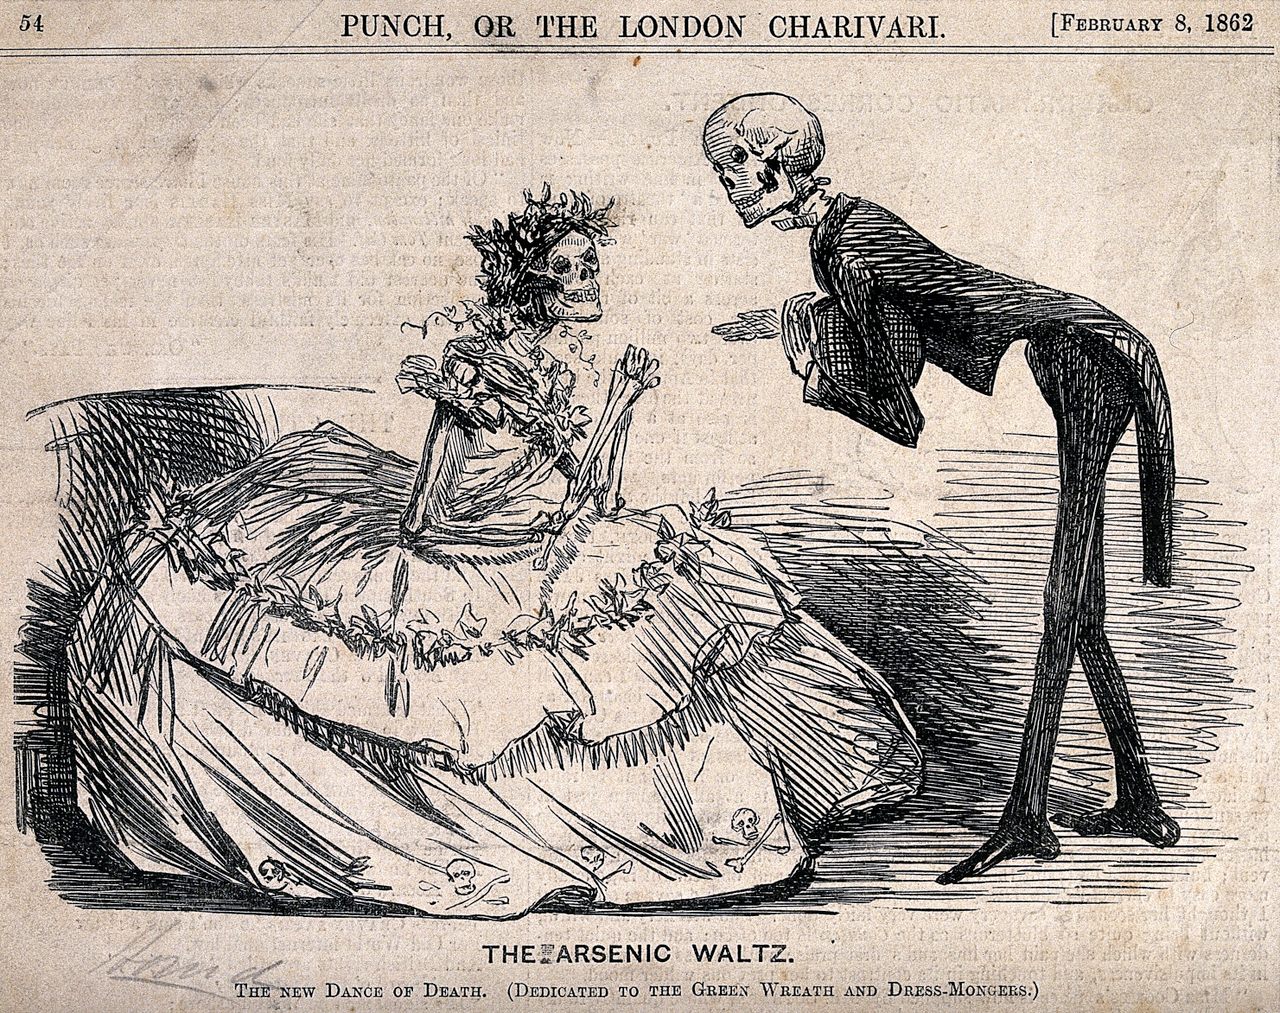 "The Arsenic Waltz" depicted the use of arsenic as a green pignment, from an 1862 issue of <em>Punch</em>. 